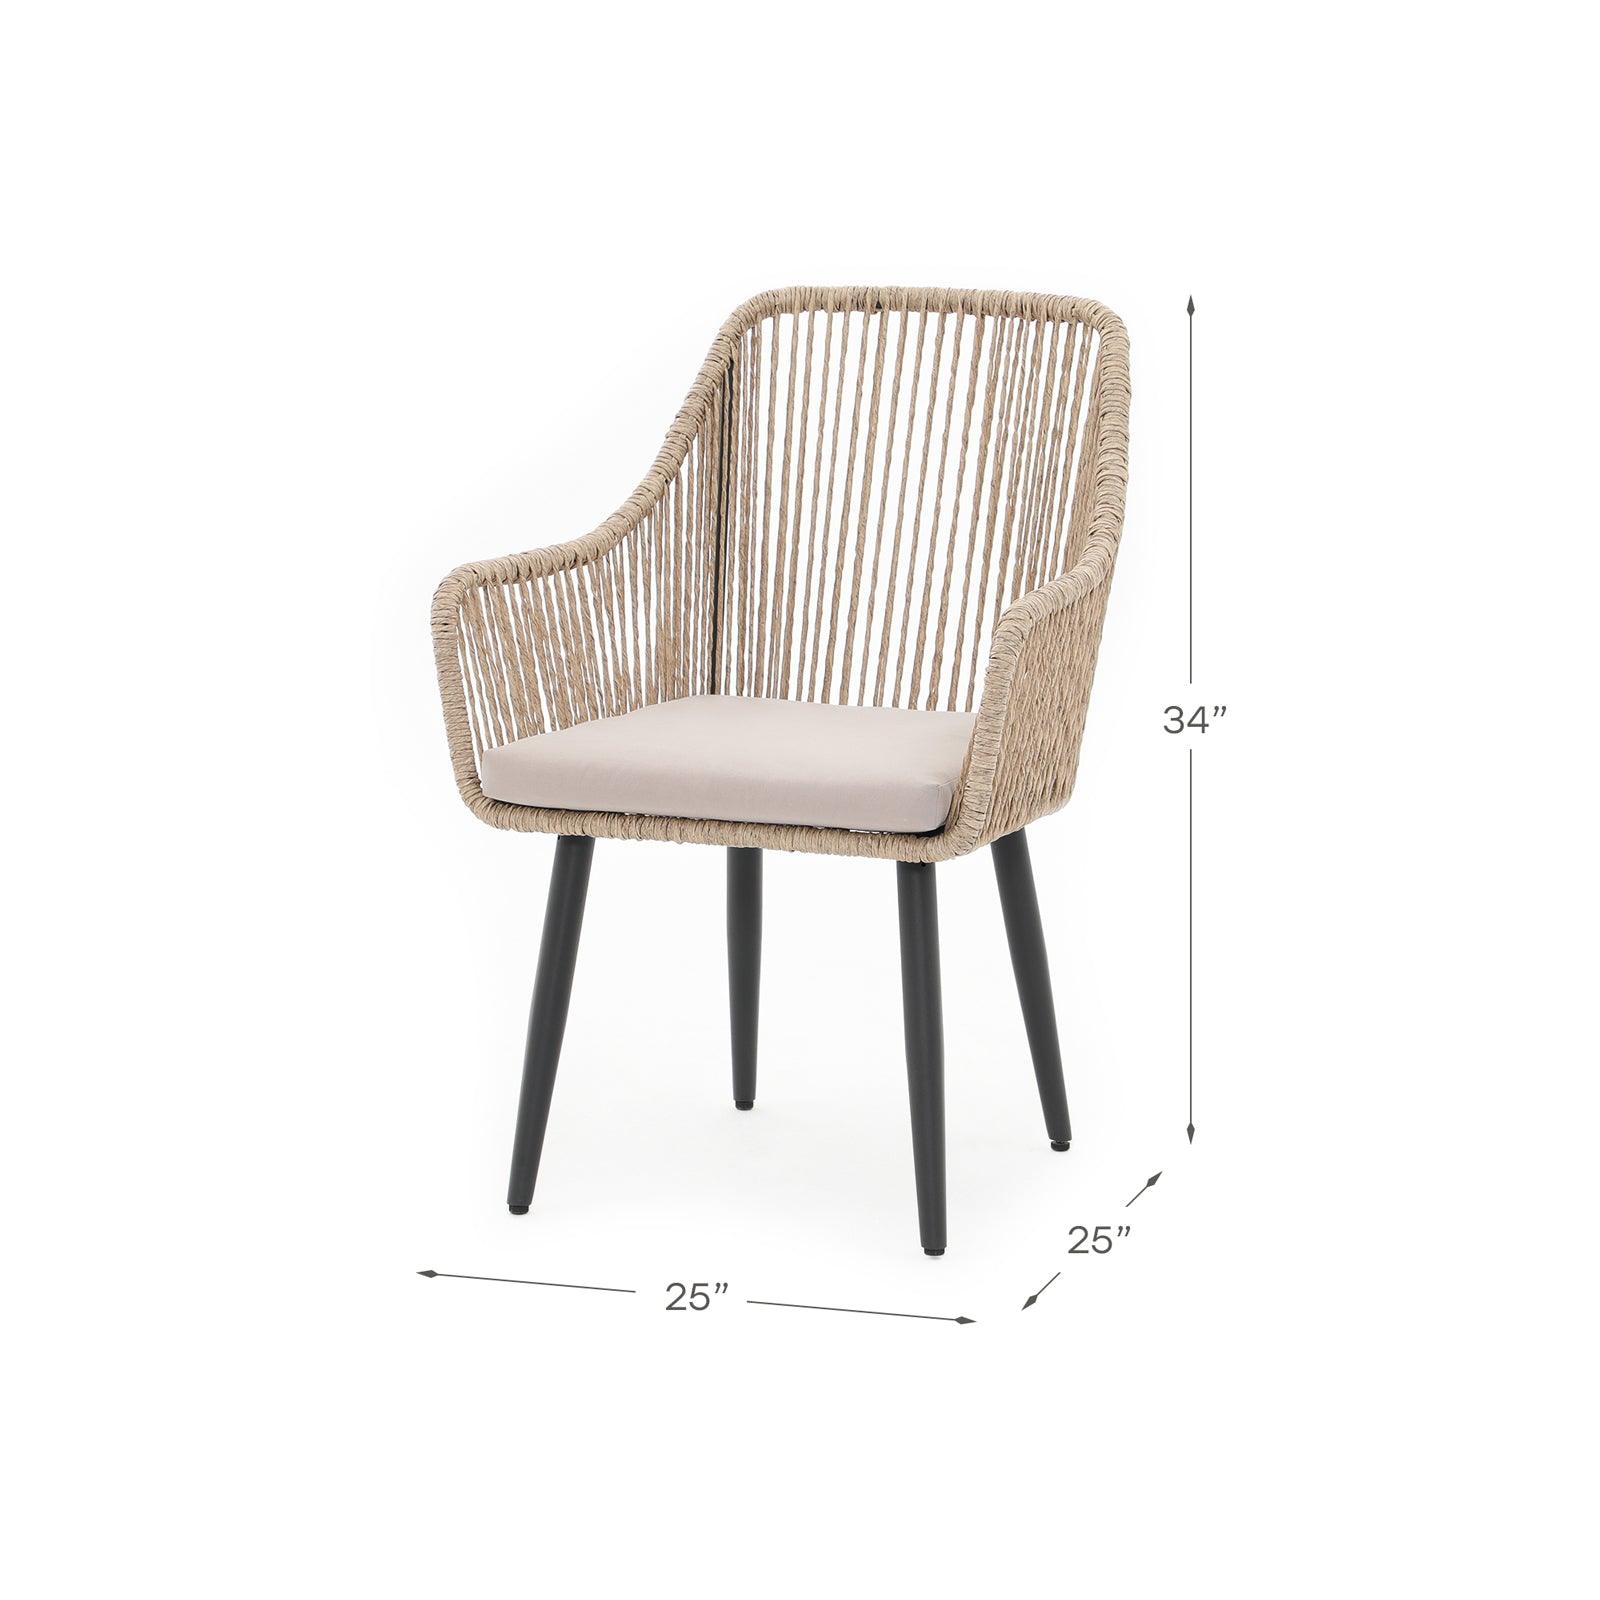 Hallerbos natural rattan Dining Chair with steel frame and cushion, dimension info- Jardina Furniture#Color_Natural